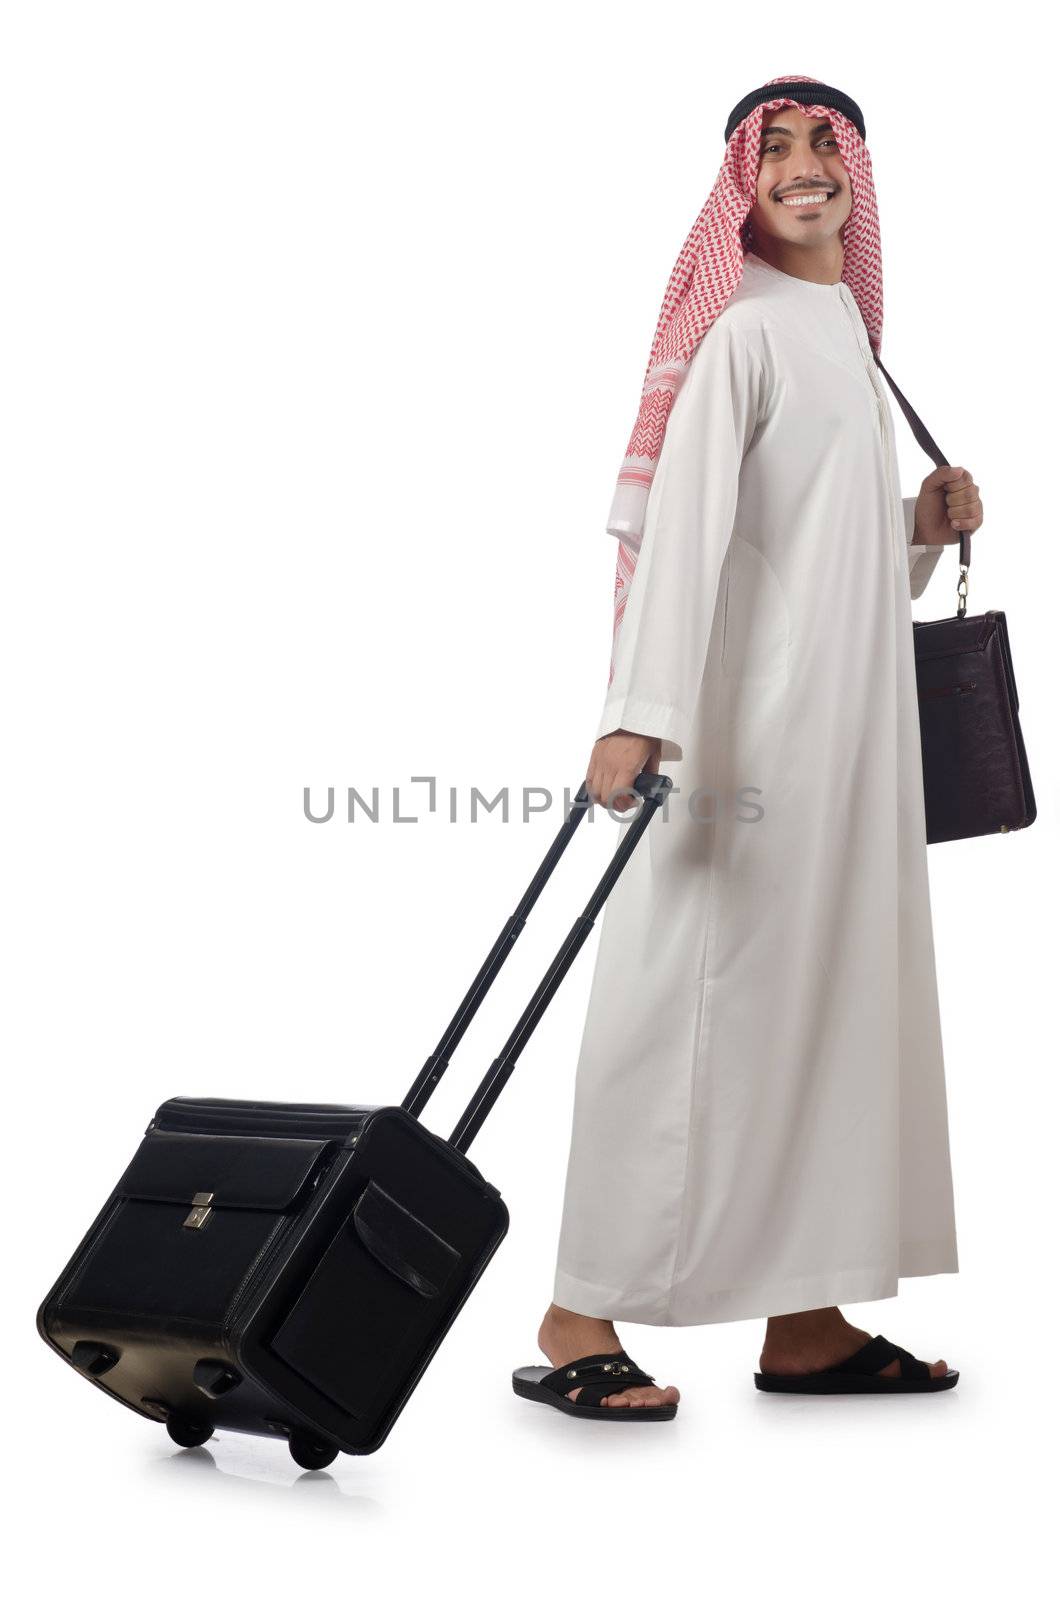 Arab on his travel with suitcase by Elnur